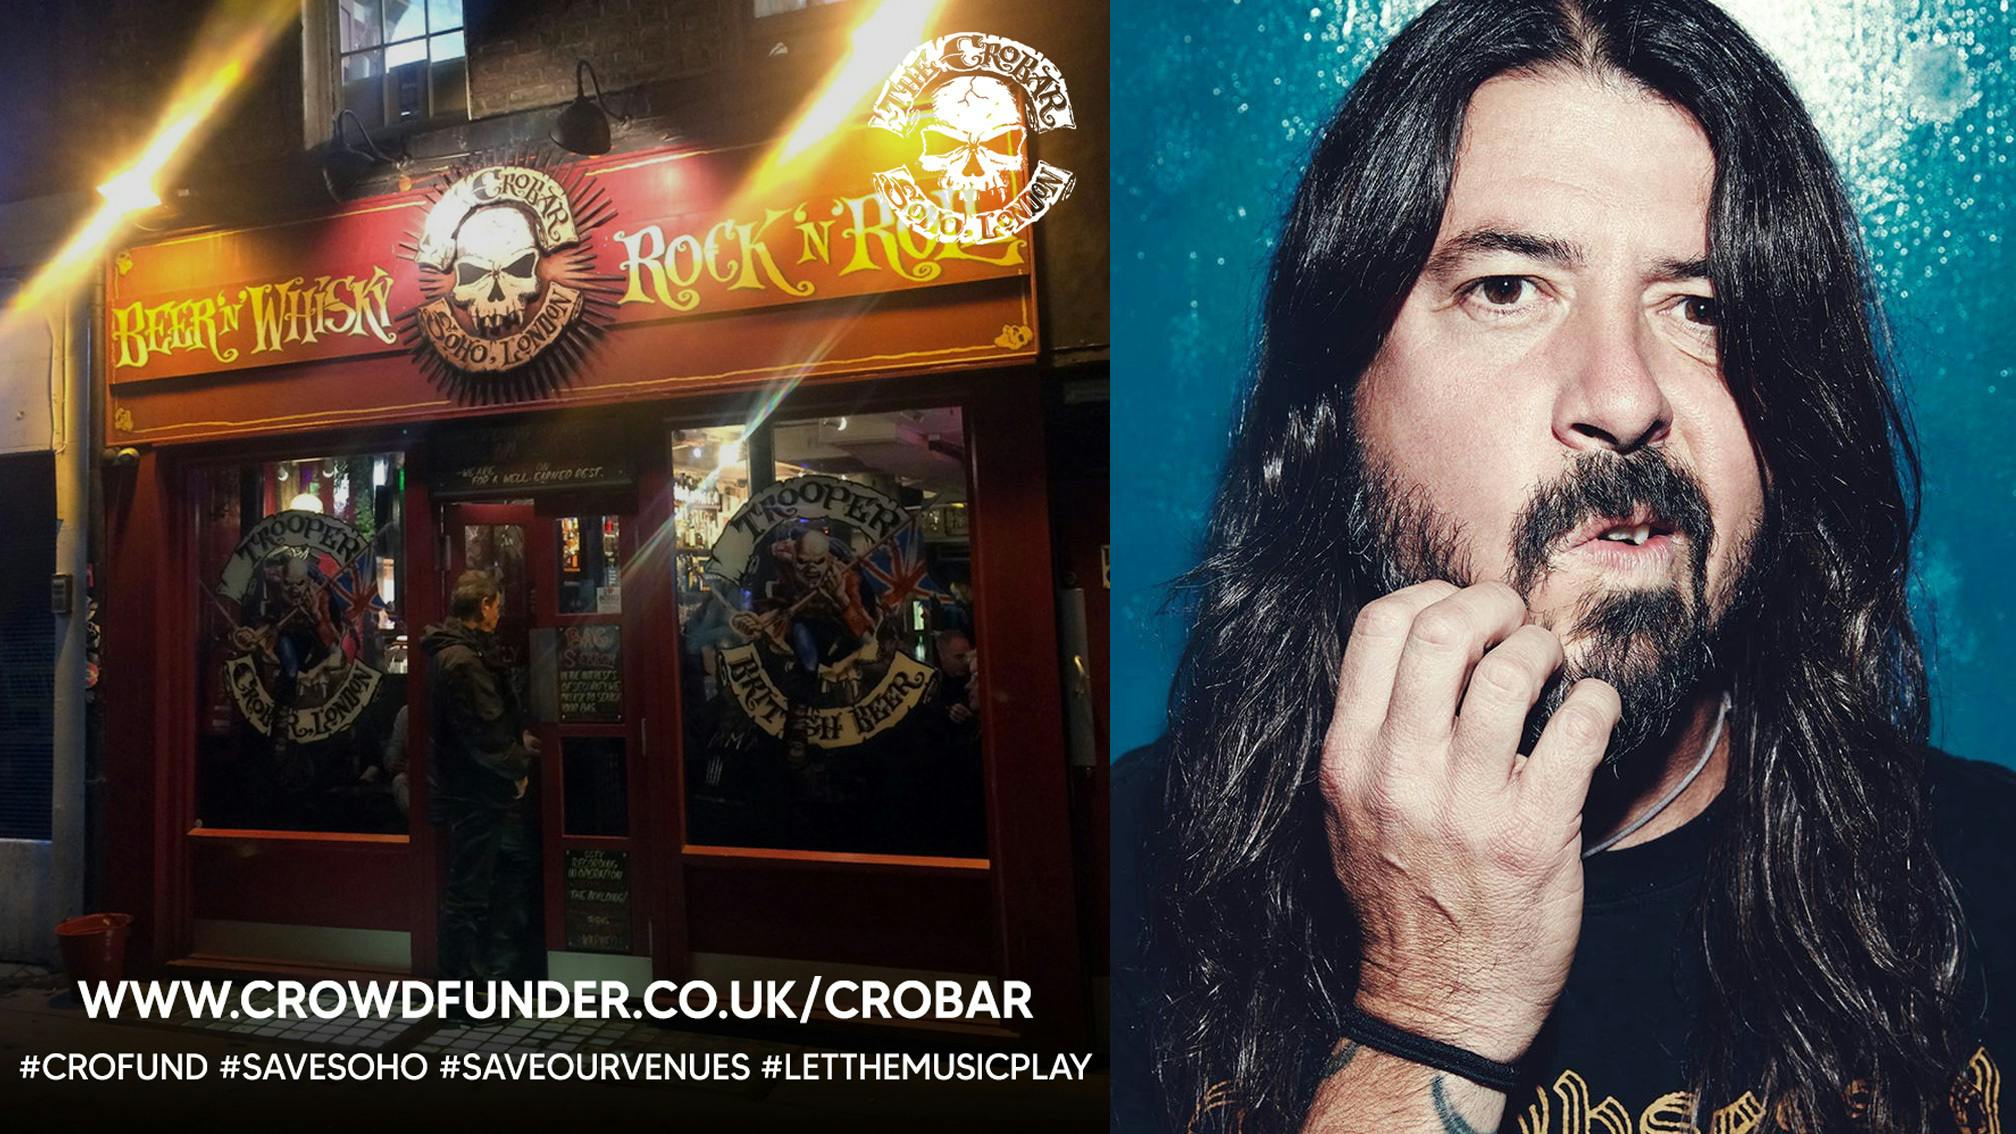 "The jukebox was legendary, but most of all there was a feeling of community": Why Dave Grohl wants to save London's legendary Crobar